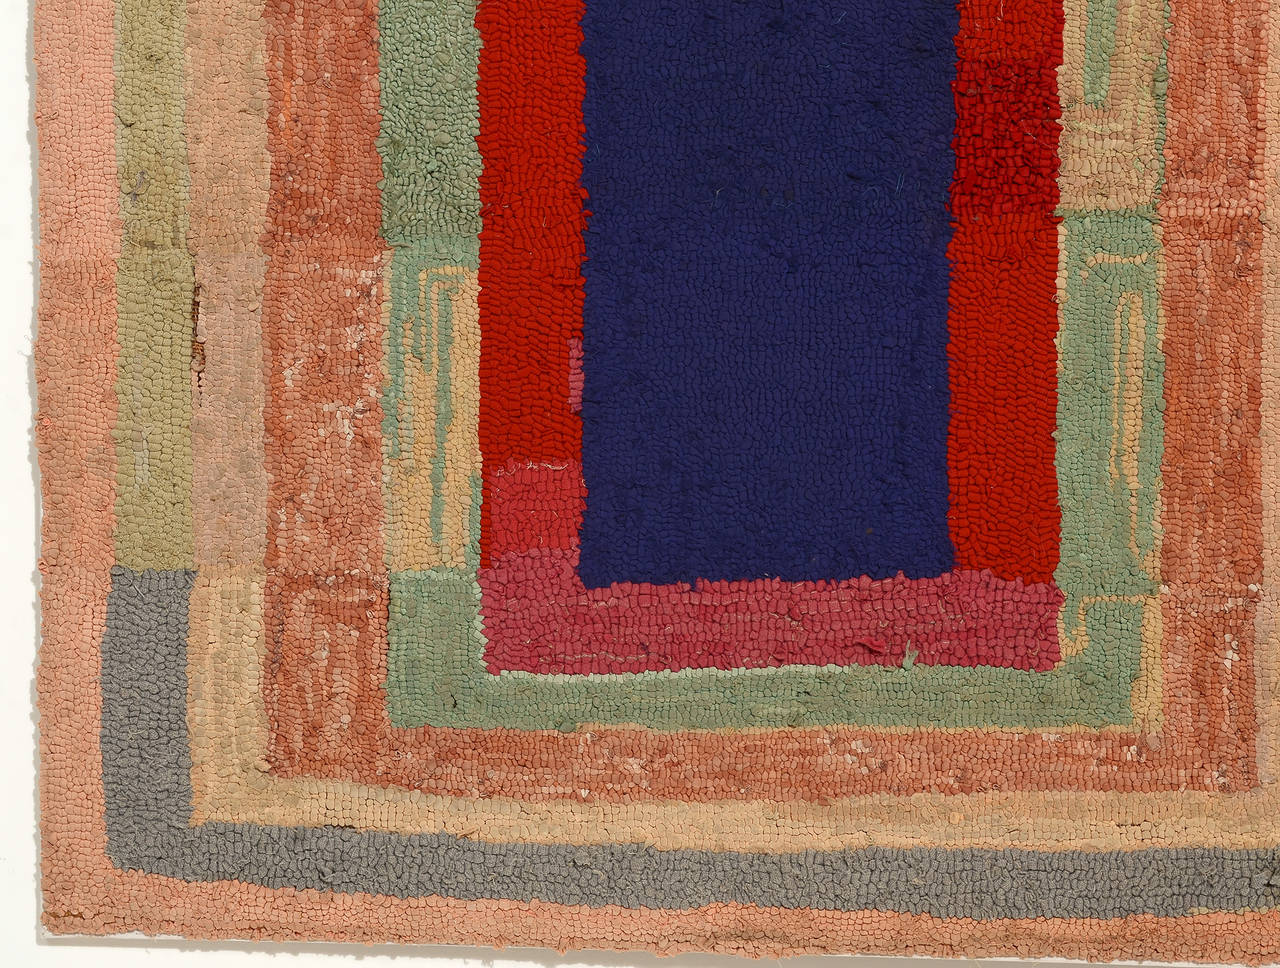 This homemade hooked rug predates by at least 15 years the Homage to the Square series of paintings by famed artist Josef Albers. The similarity, though, is unmistakable. This rug is hooked of a variety of cotton and wool fabrics. It is loosely